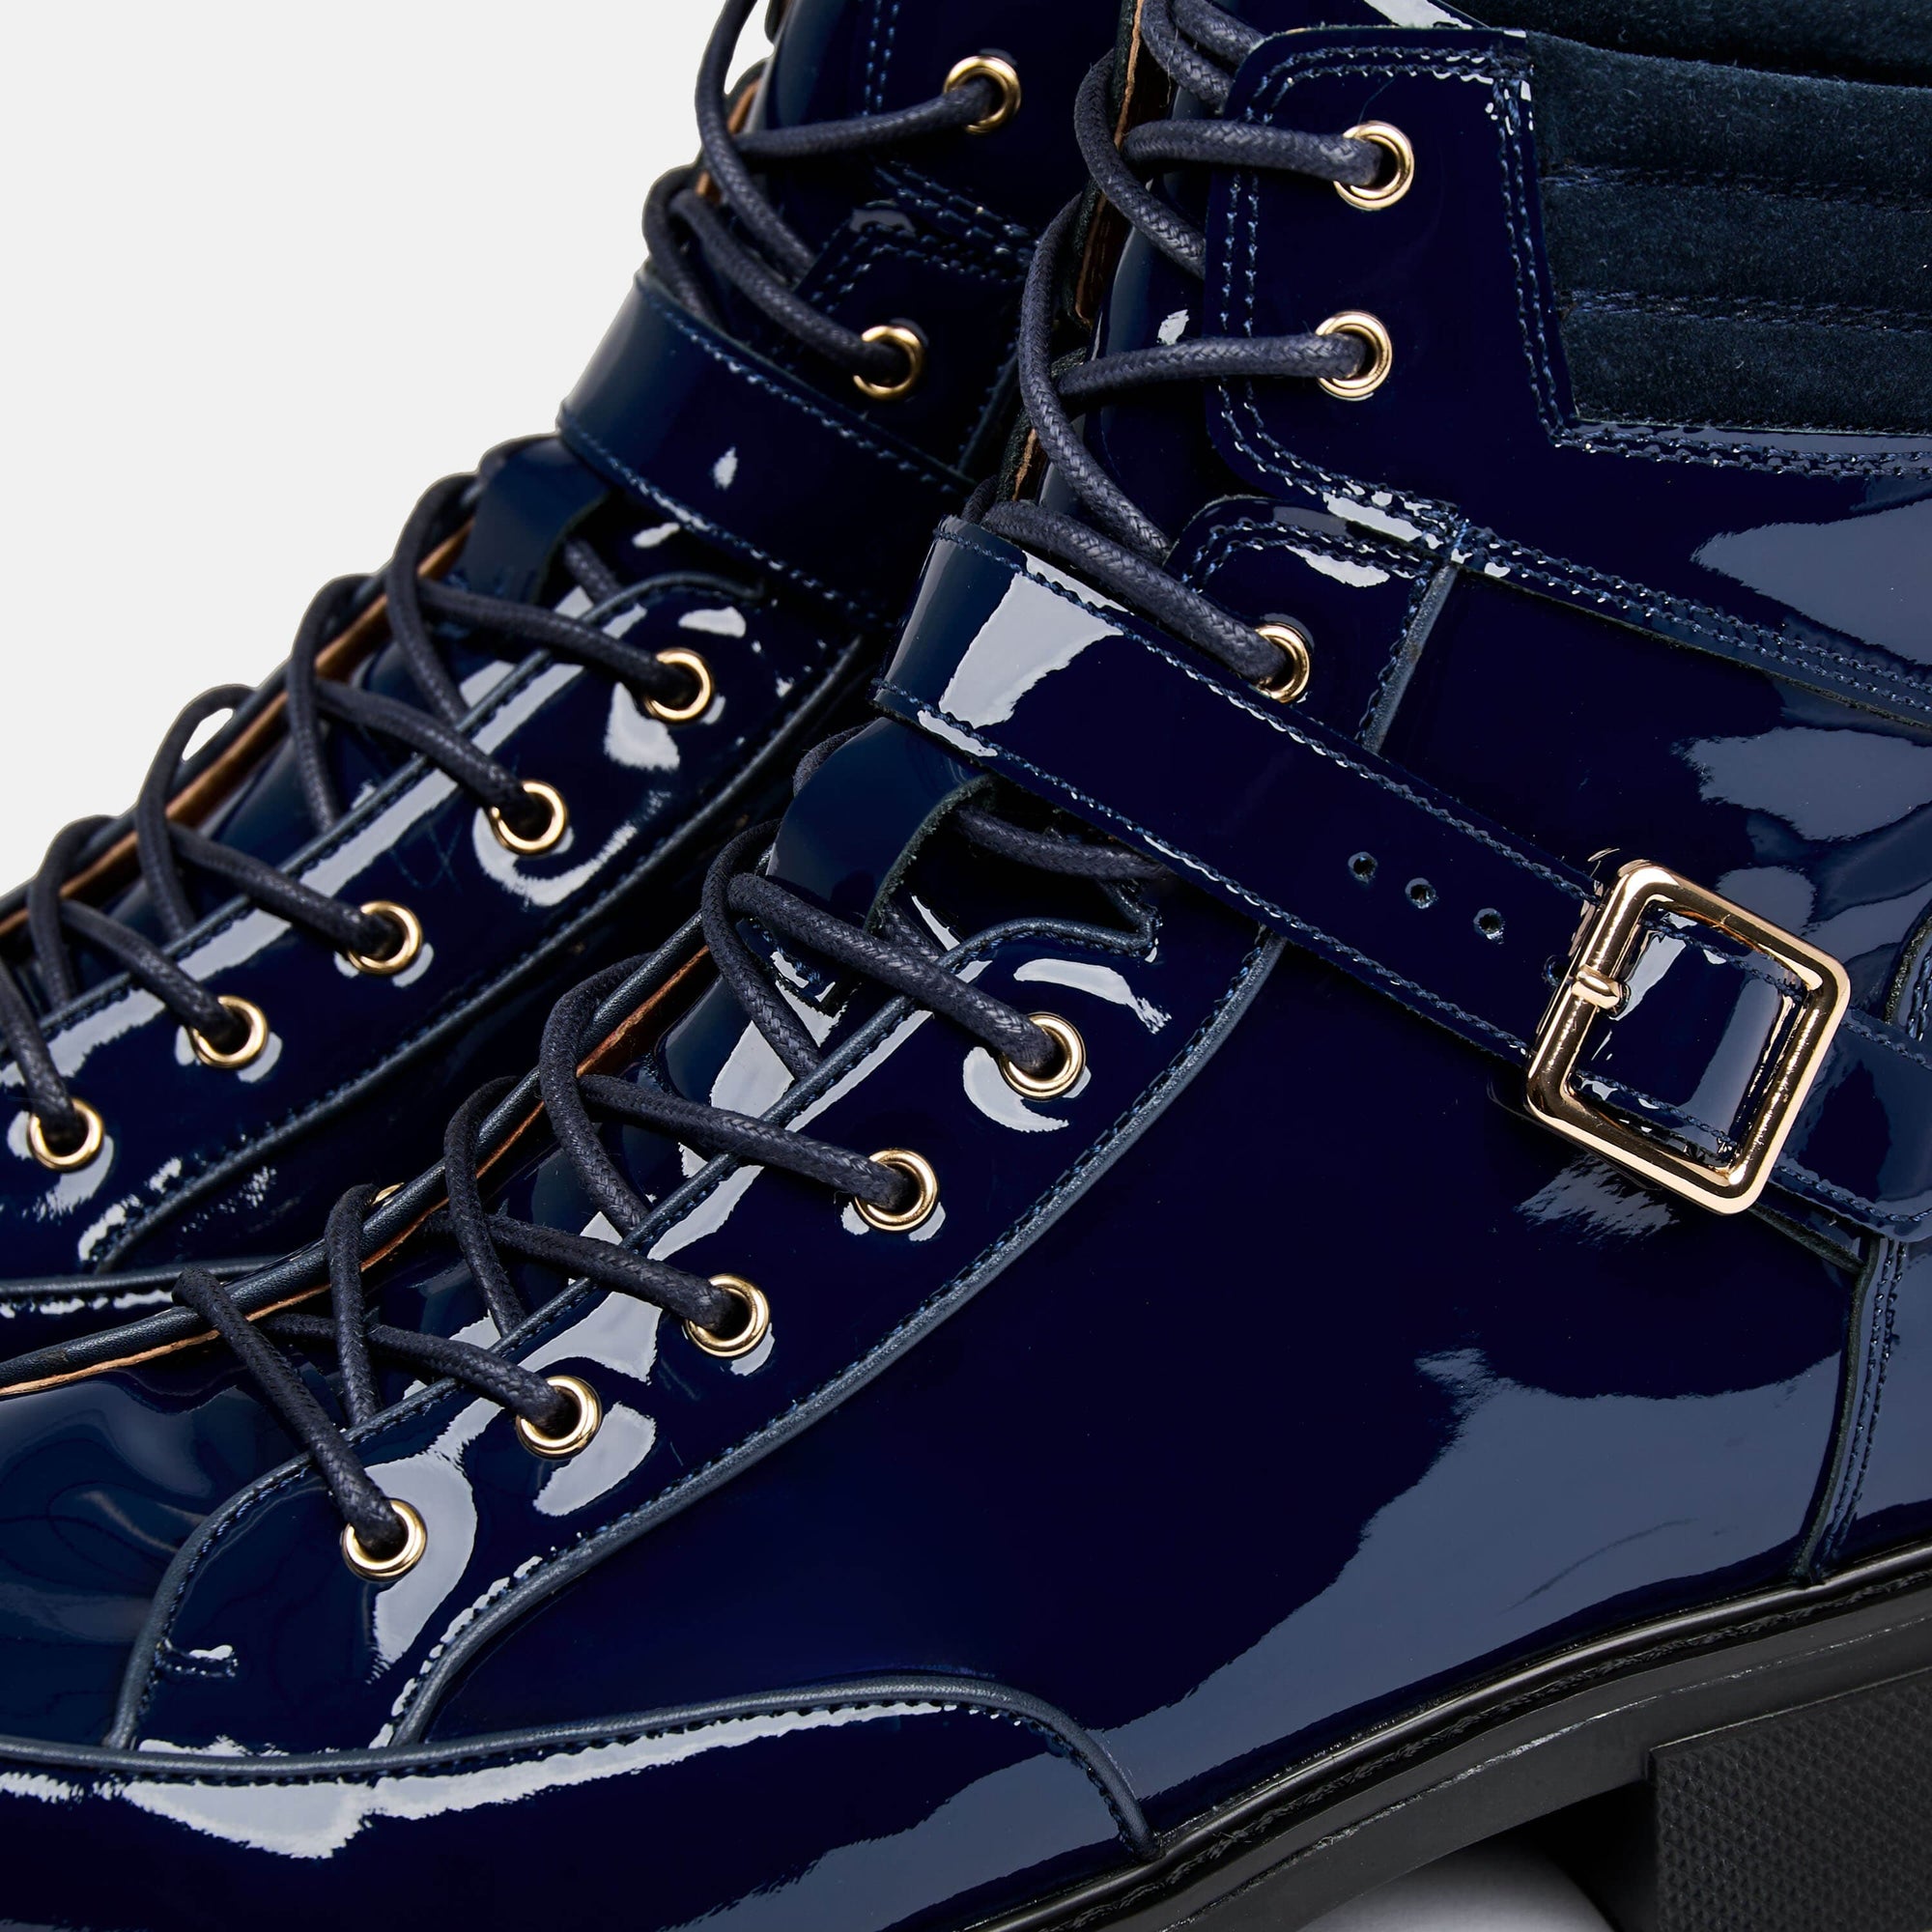 Atlas Navy Patent Leather Strap Boots - Leather - Size: 12 by Marc Nolan